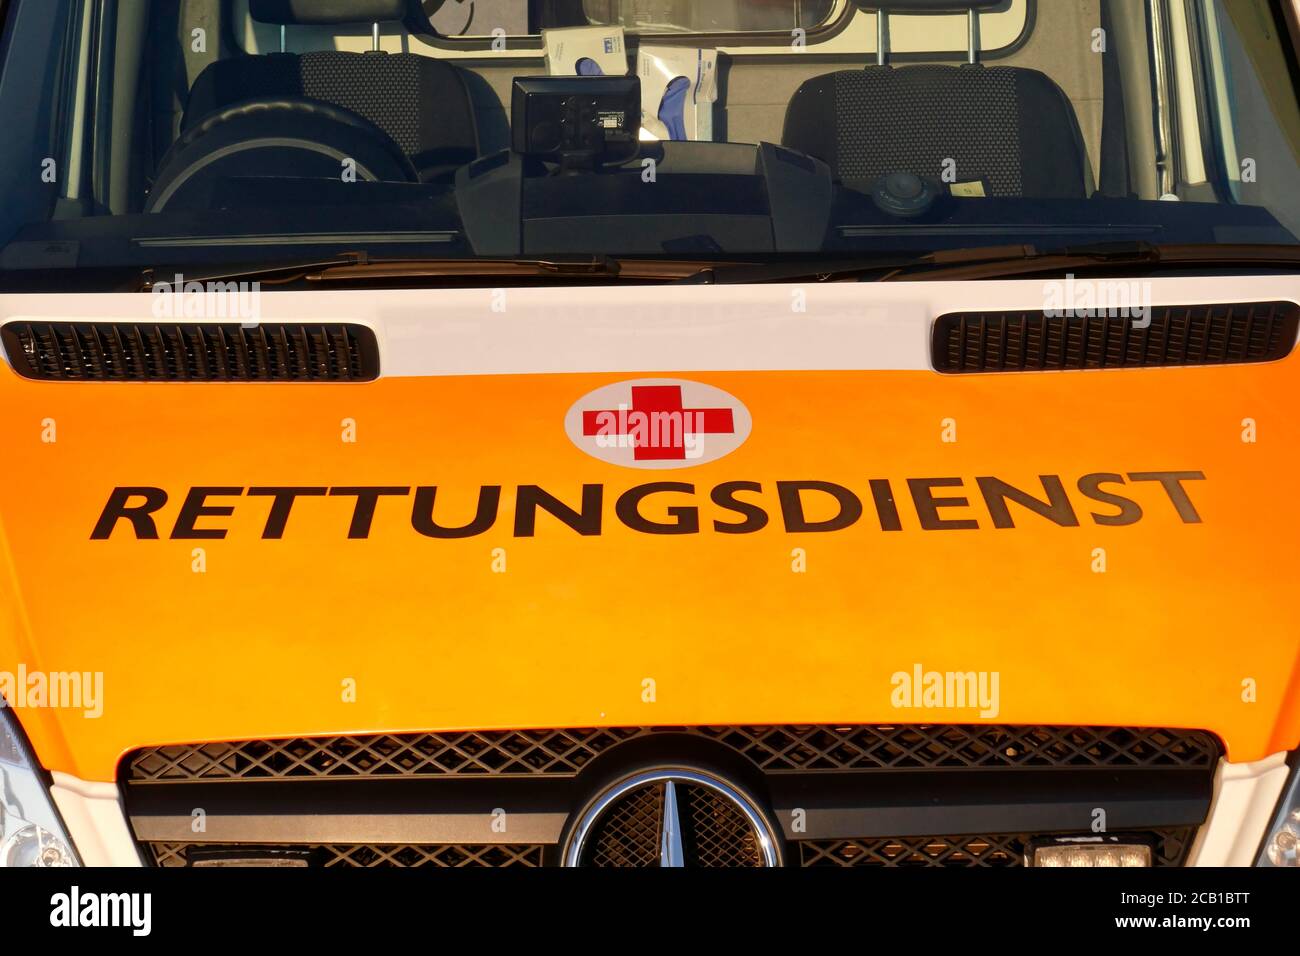 Lettering rescue service and Red Cross logo on an ambulance, Germany Stock Photo